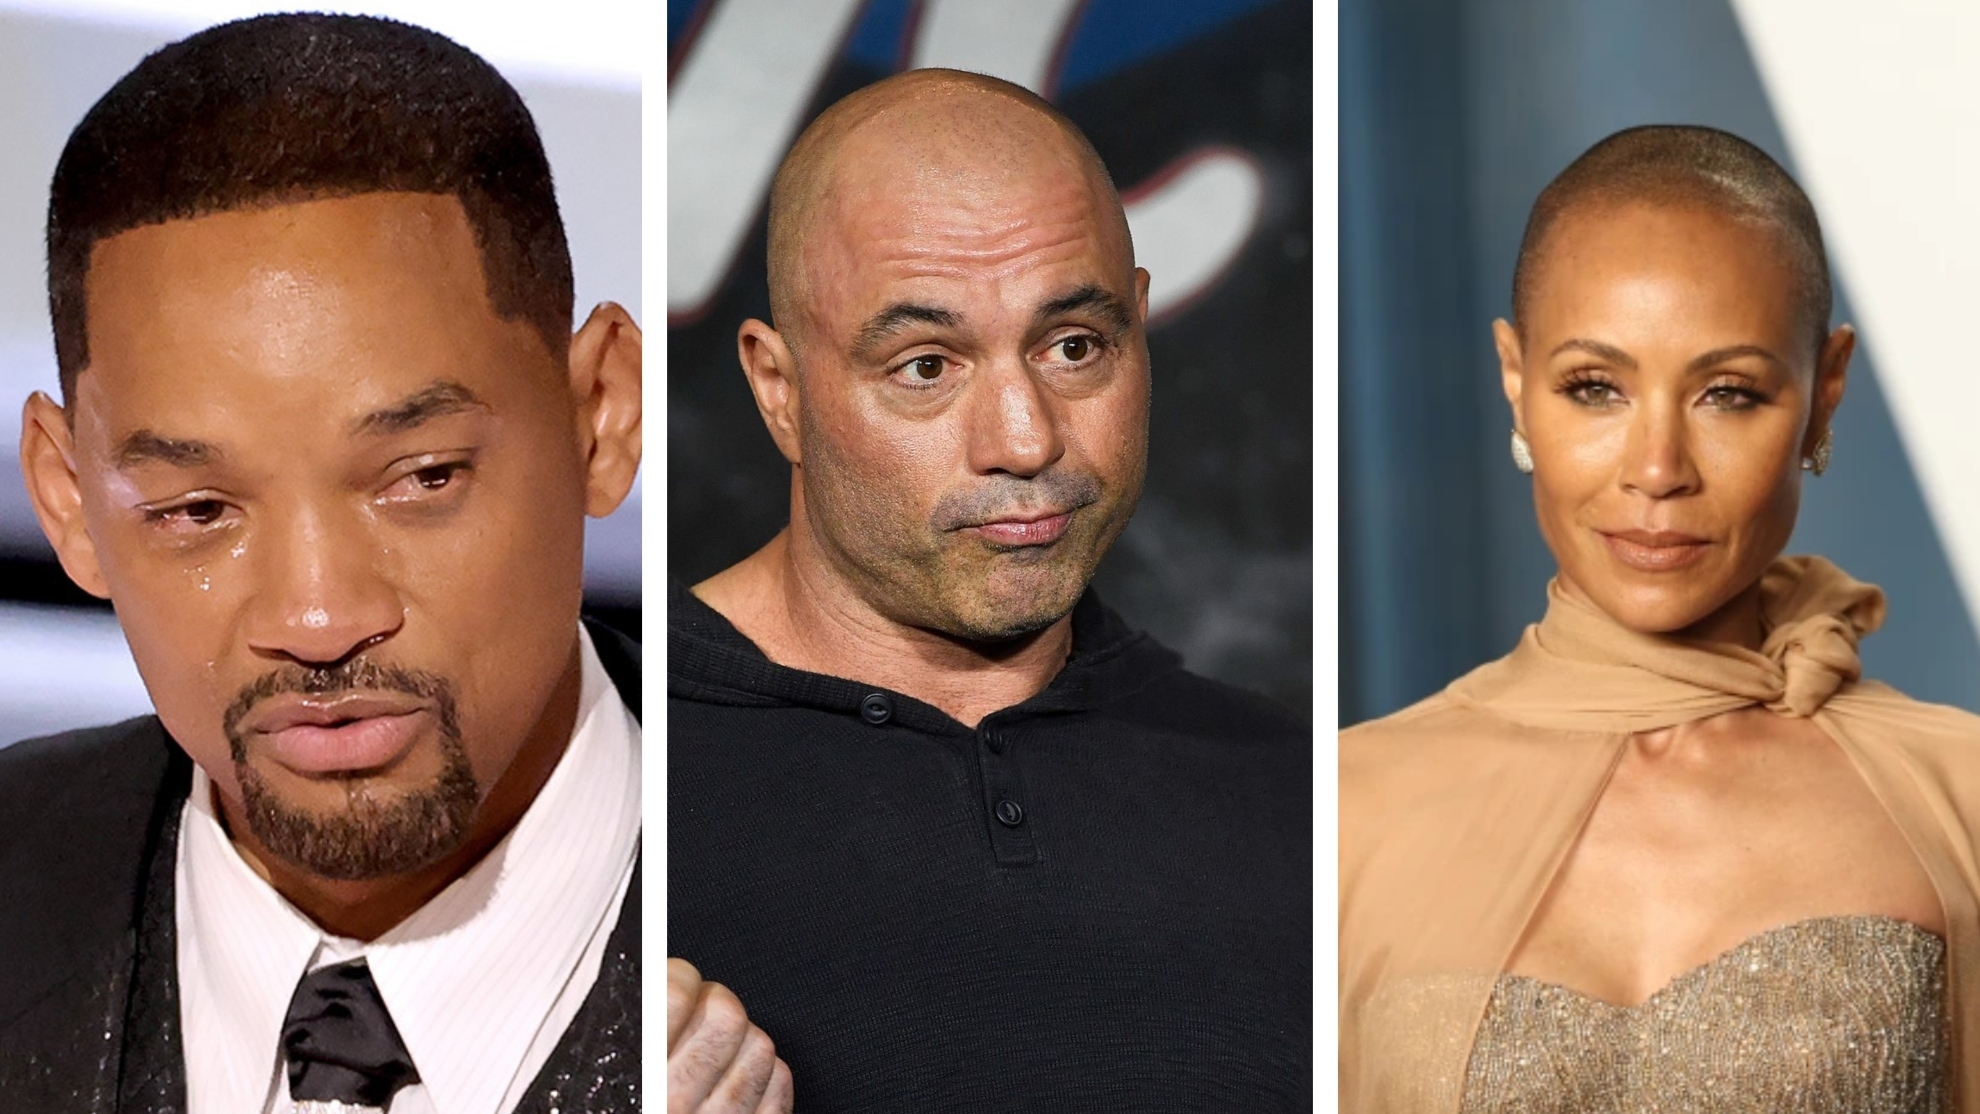 Joe Rogan bets $100 Will Smith gets divorced this year